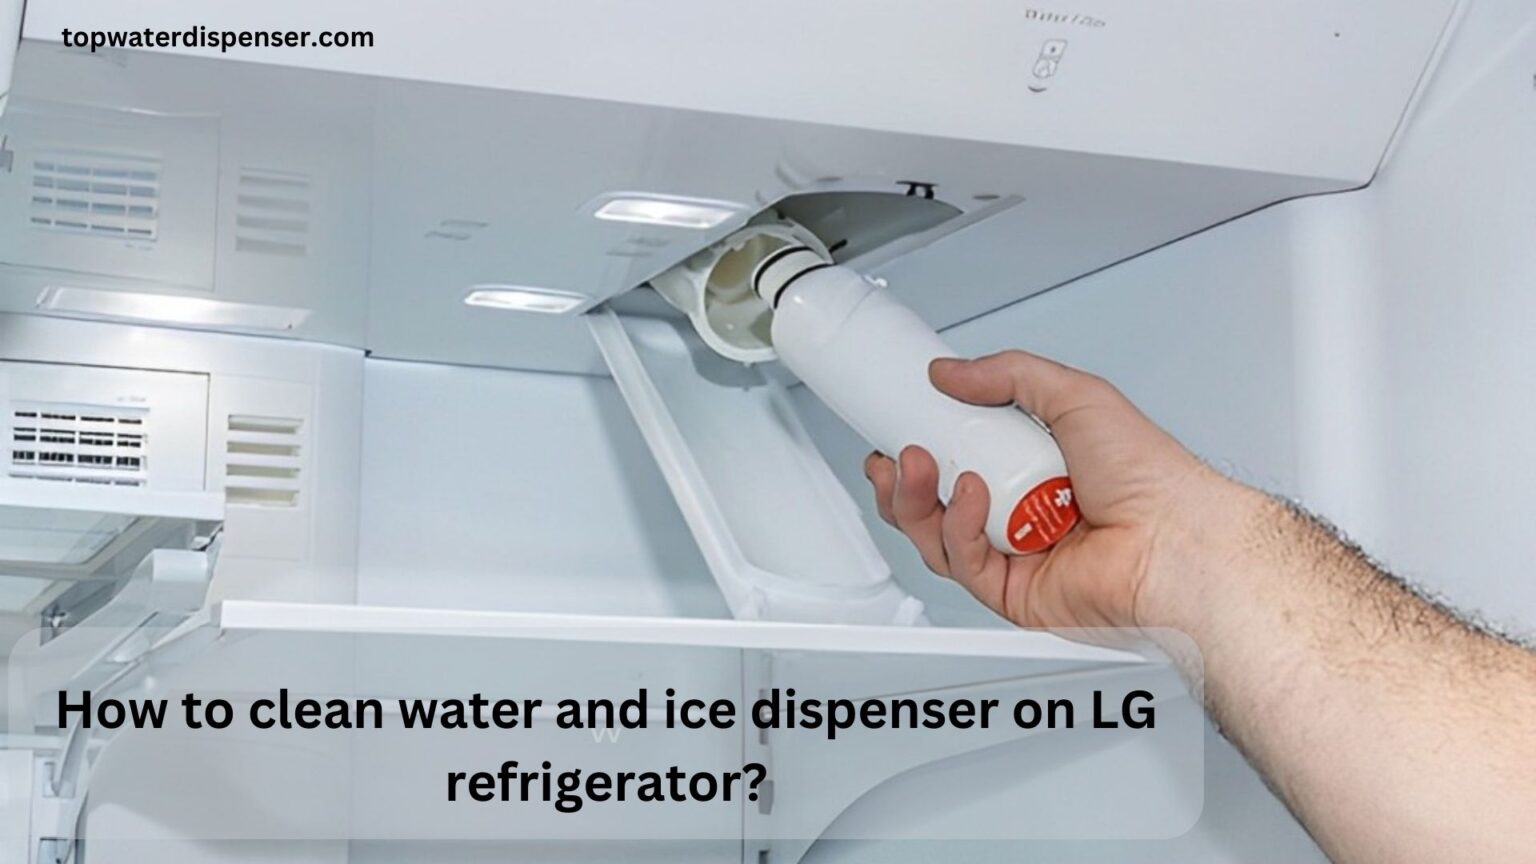 How to clean water and ice dispenser on LG refrigerator?